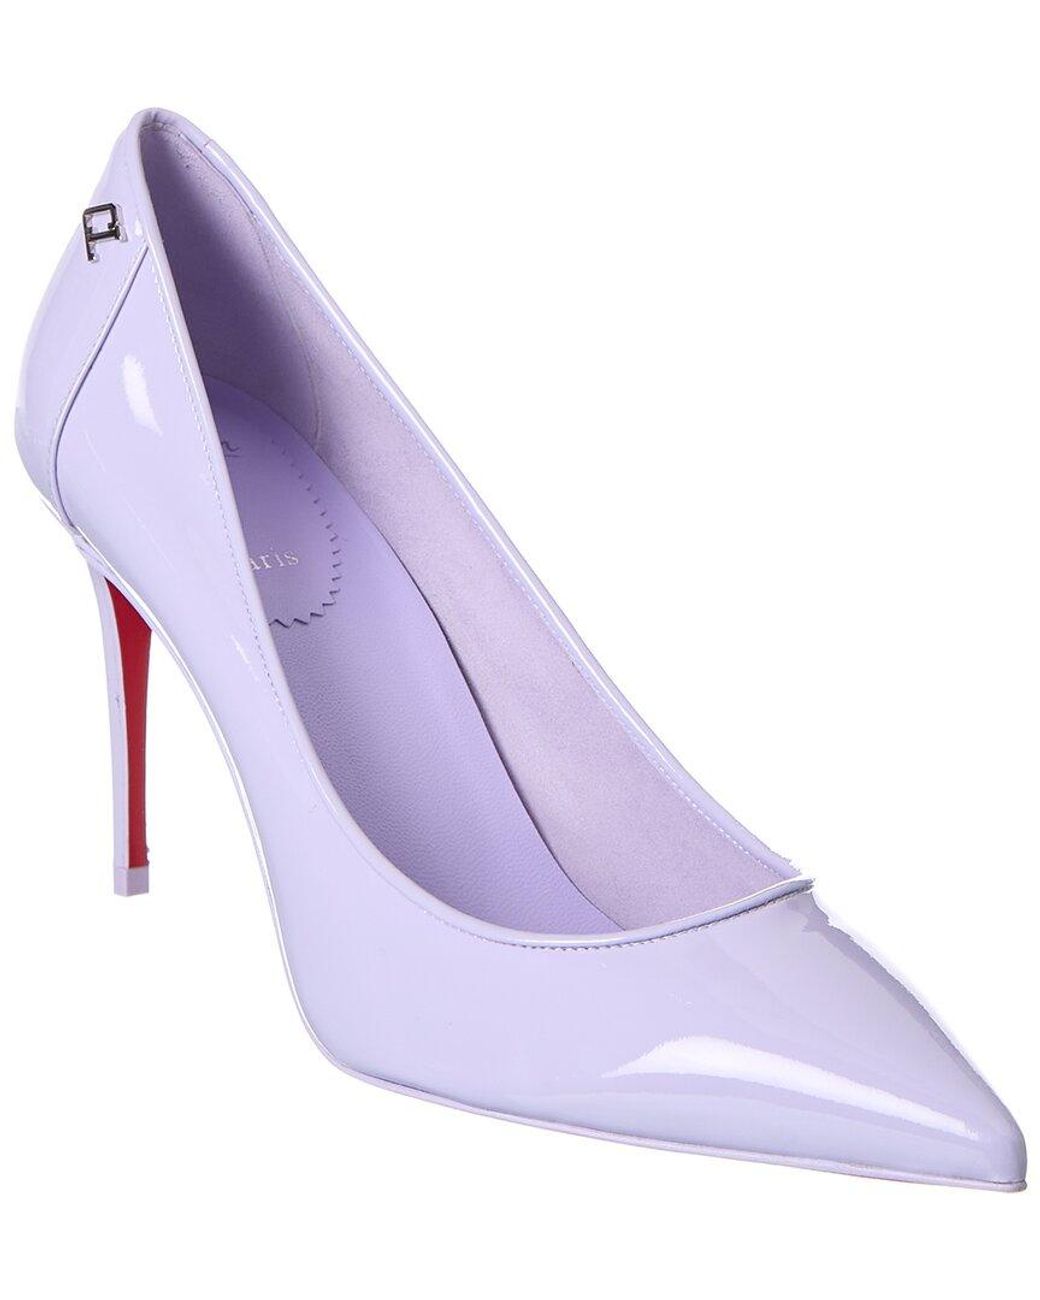 Christian Louboutin Sporty Kate 85 Patent Pump in Purple | Lyst